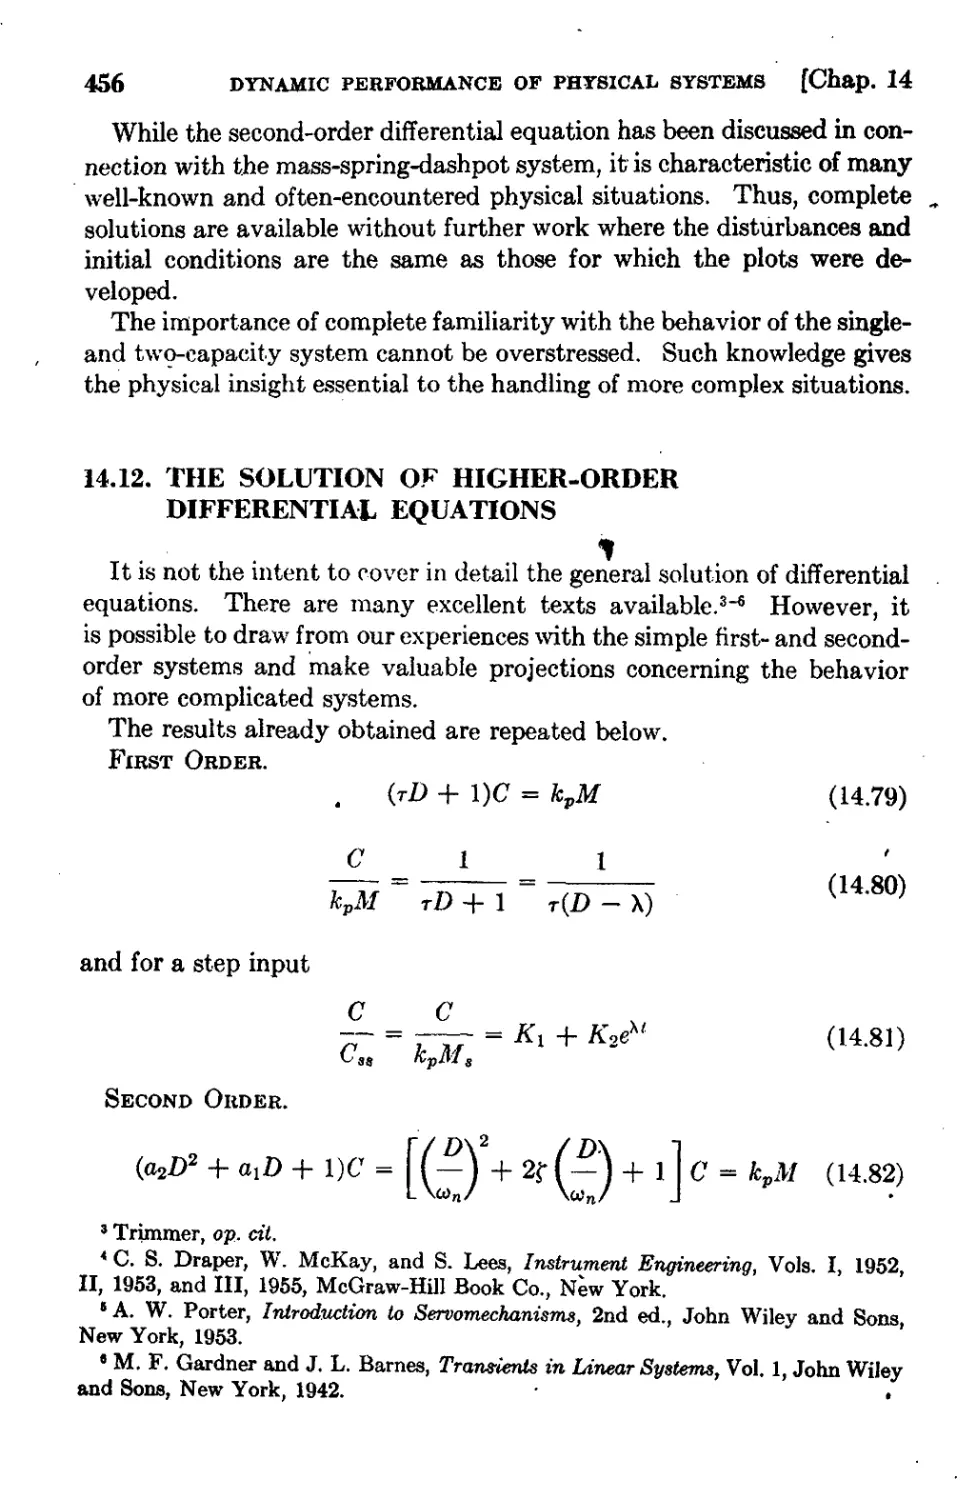 14.12 The Solution of Higher-Order Differential Equations